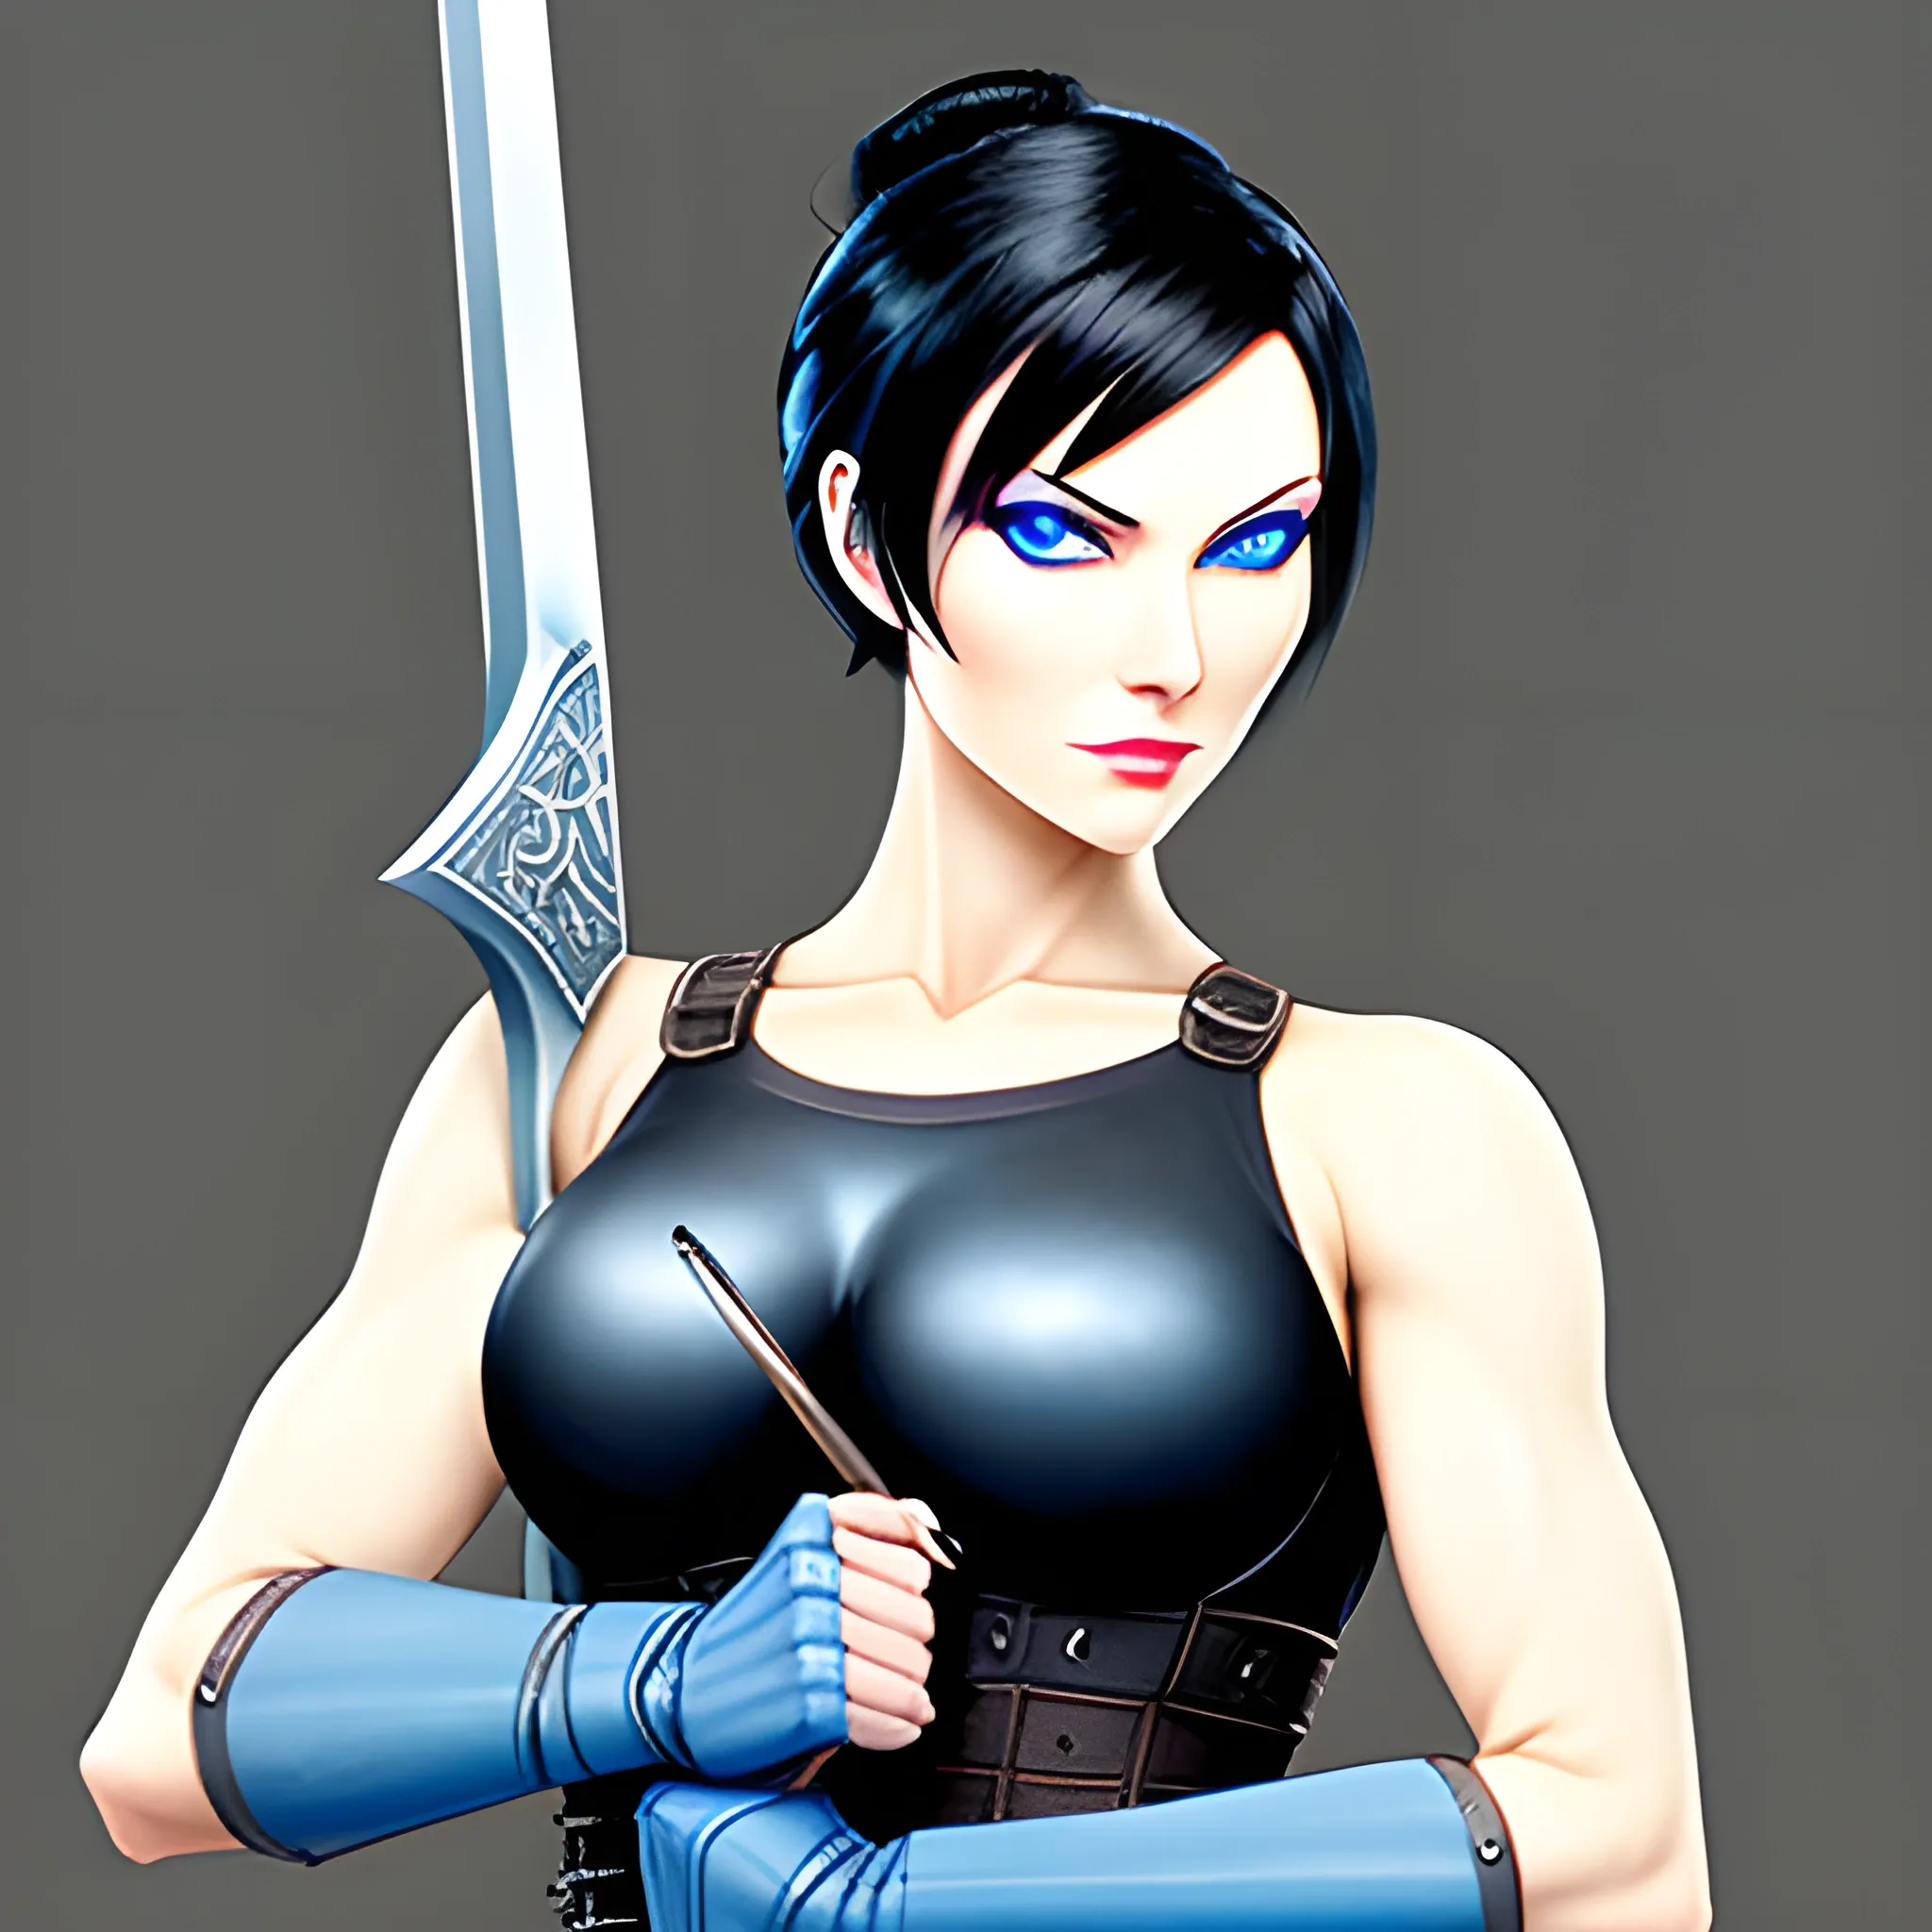 a young sexy medieval warrior girl with short black hair in a bun, blue eyes and pale skin, wielding a two-handed claymore